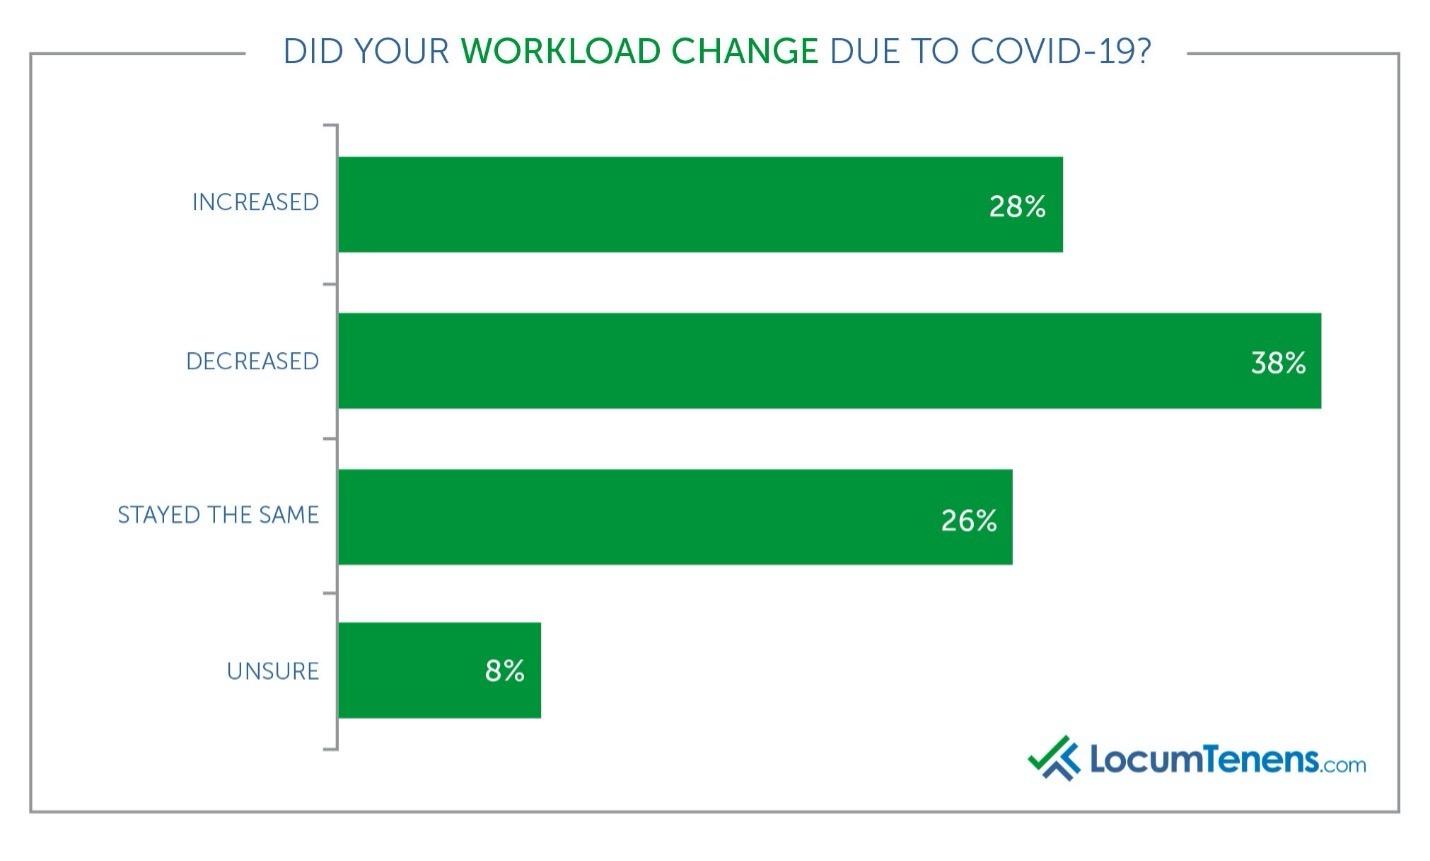 Workload change due to COVID-19